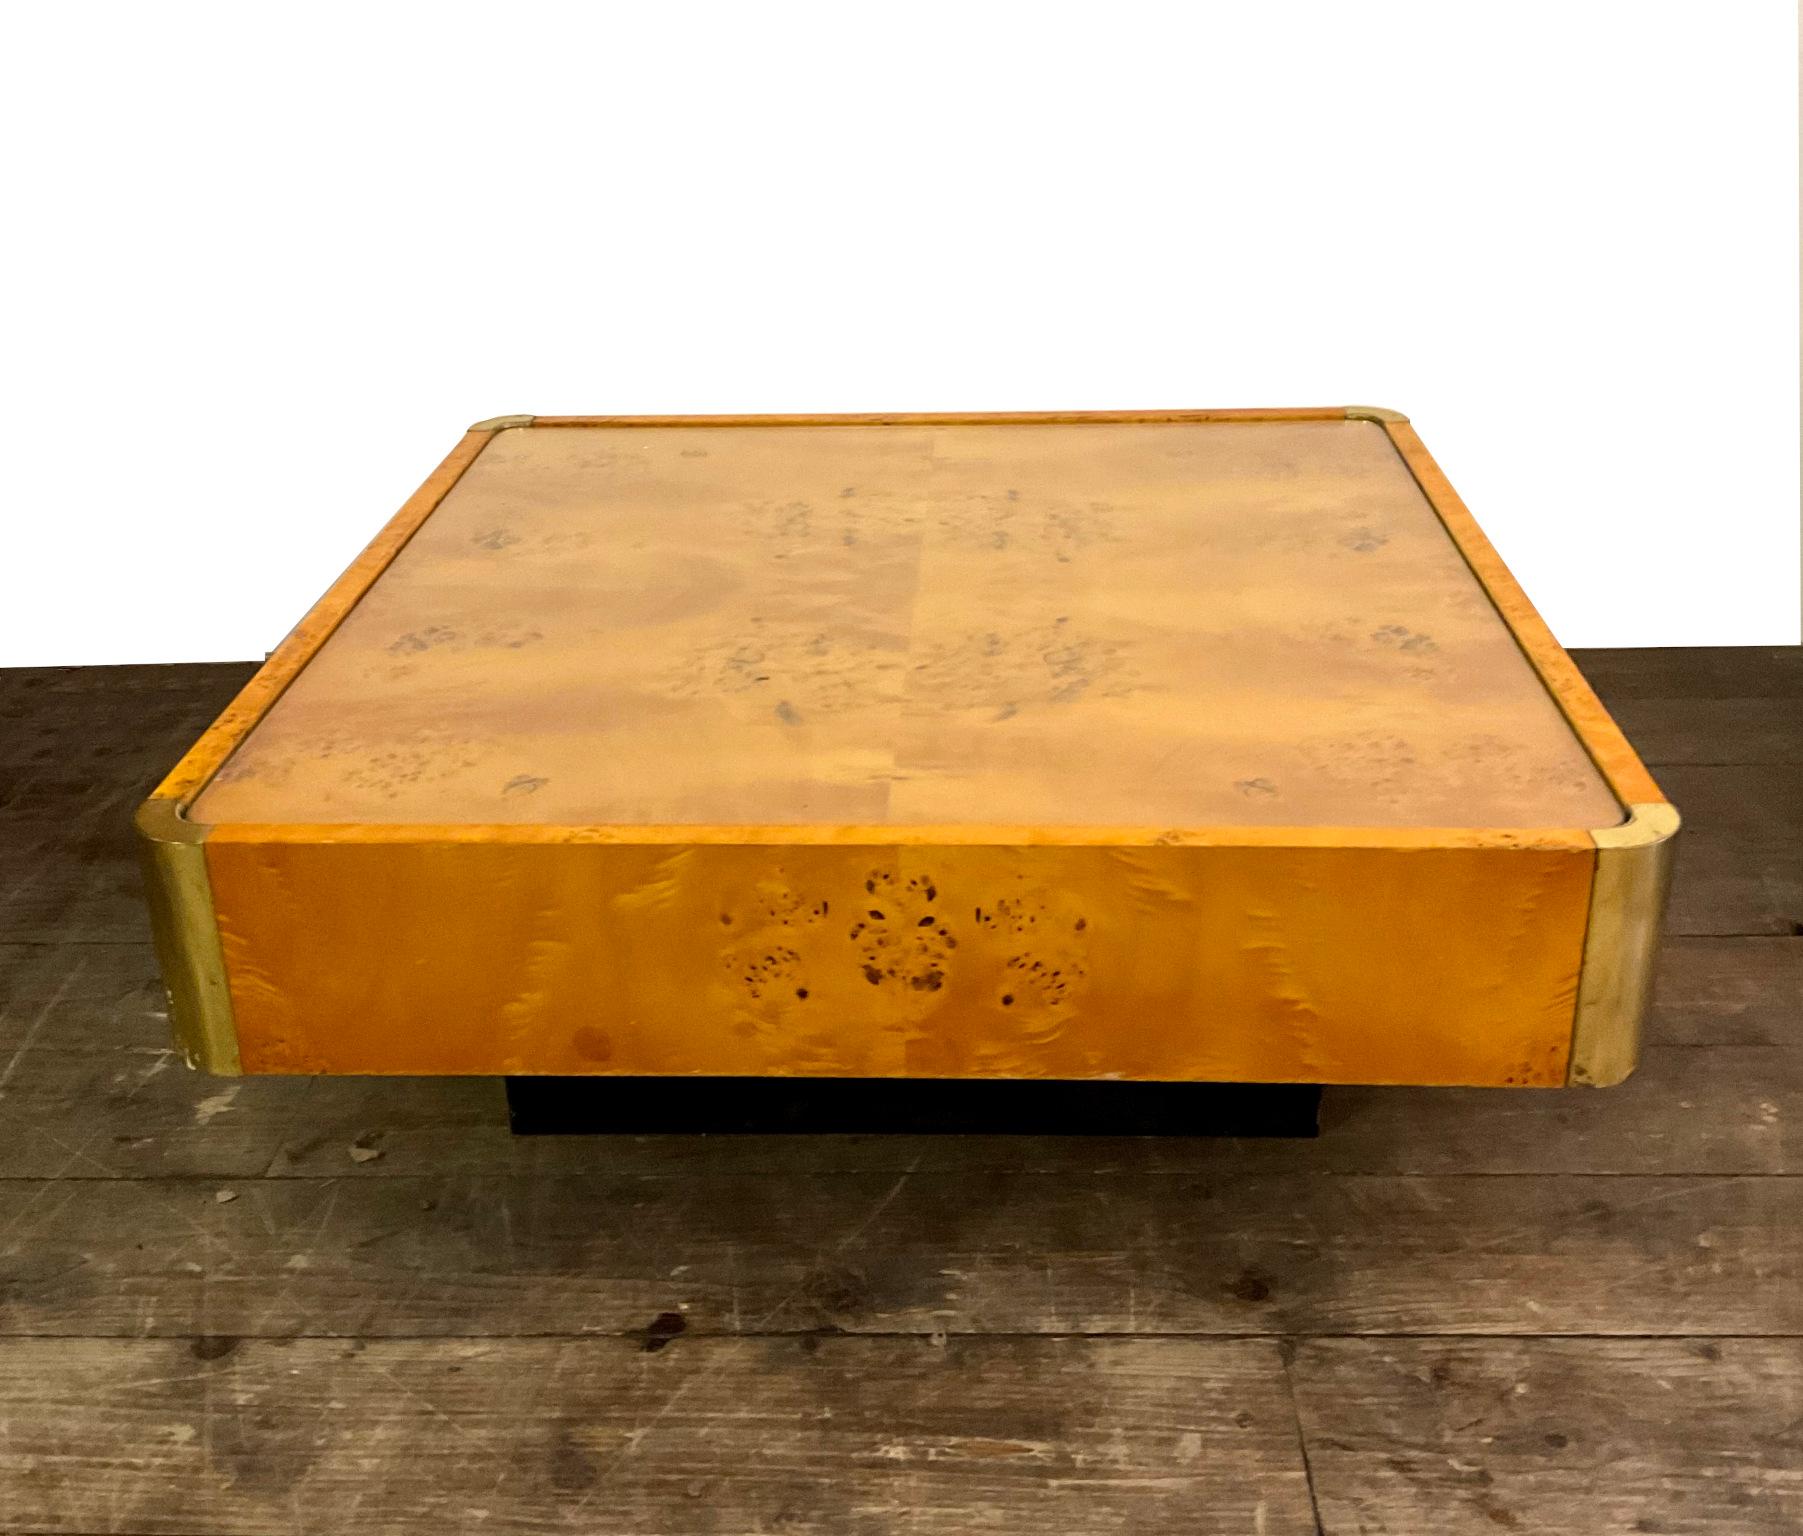 Italian coffee table from the 1970s in burlwood edited by Mario Sabot in the spirit of the creations of Willy Rizzo with whom he was associated for some of these pieces. Including a glass top.